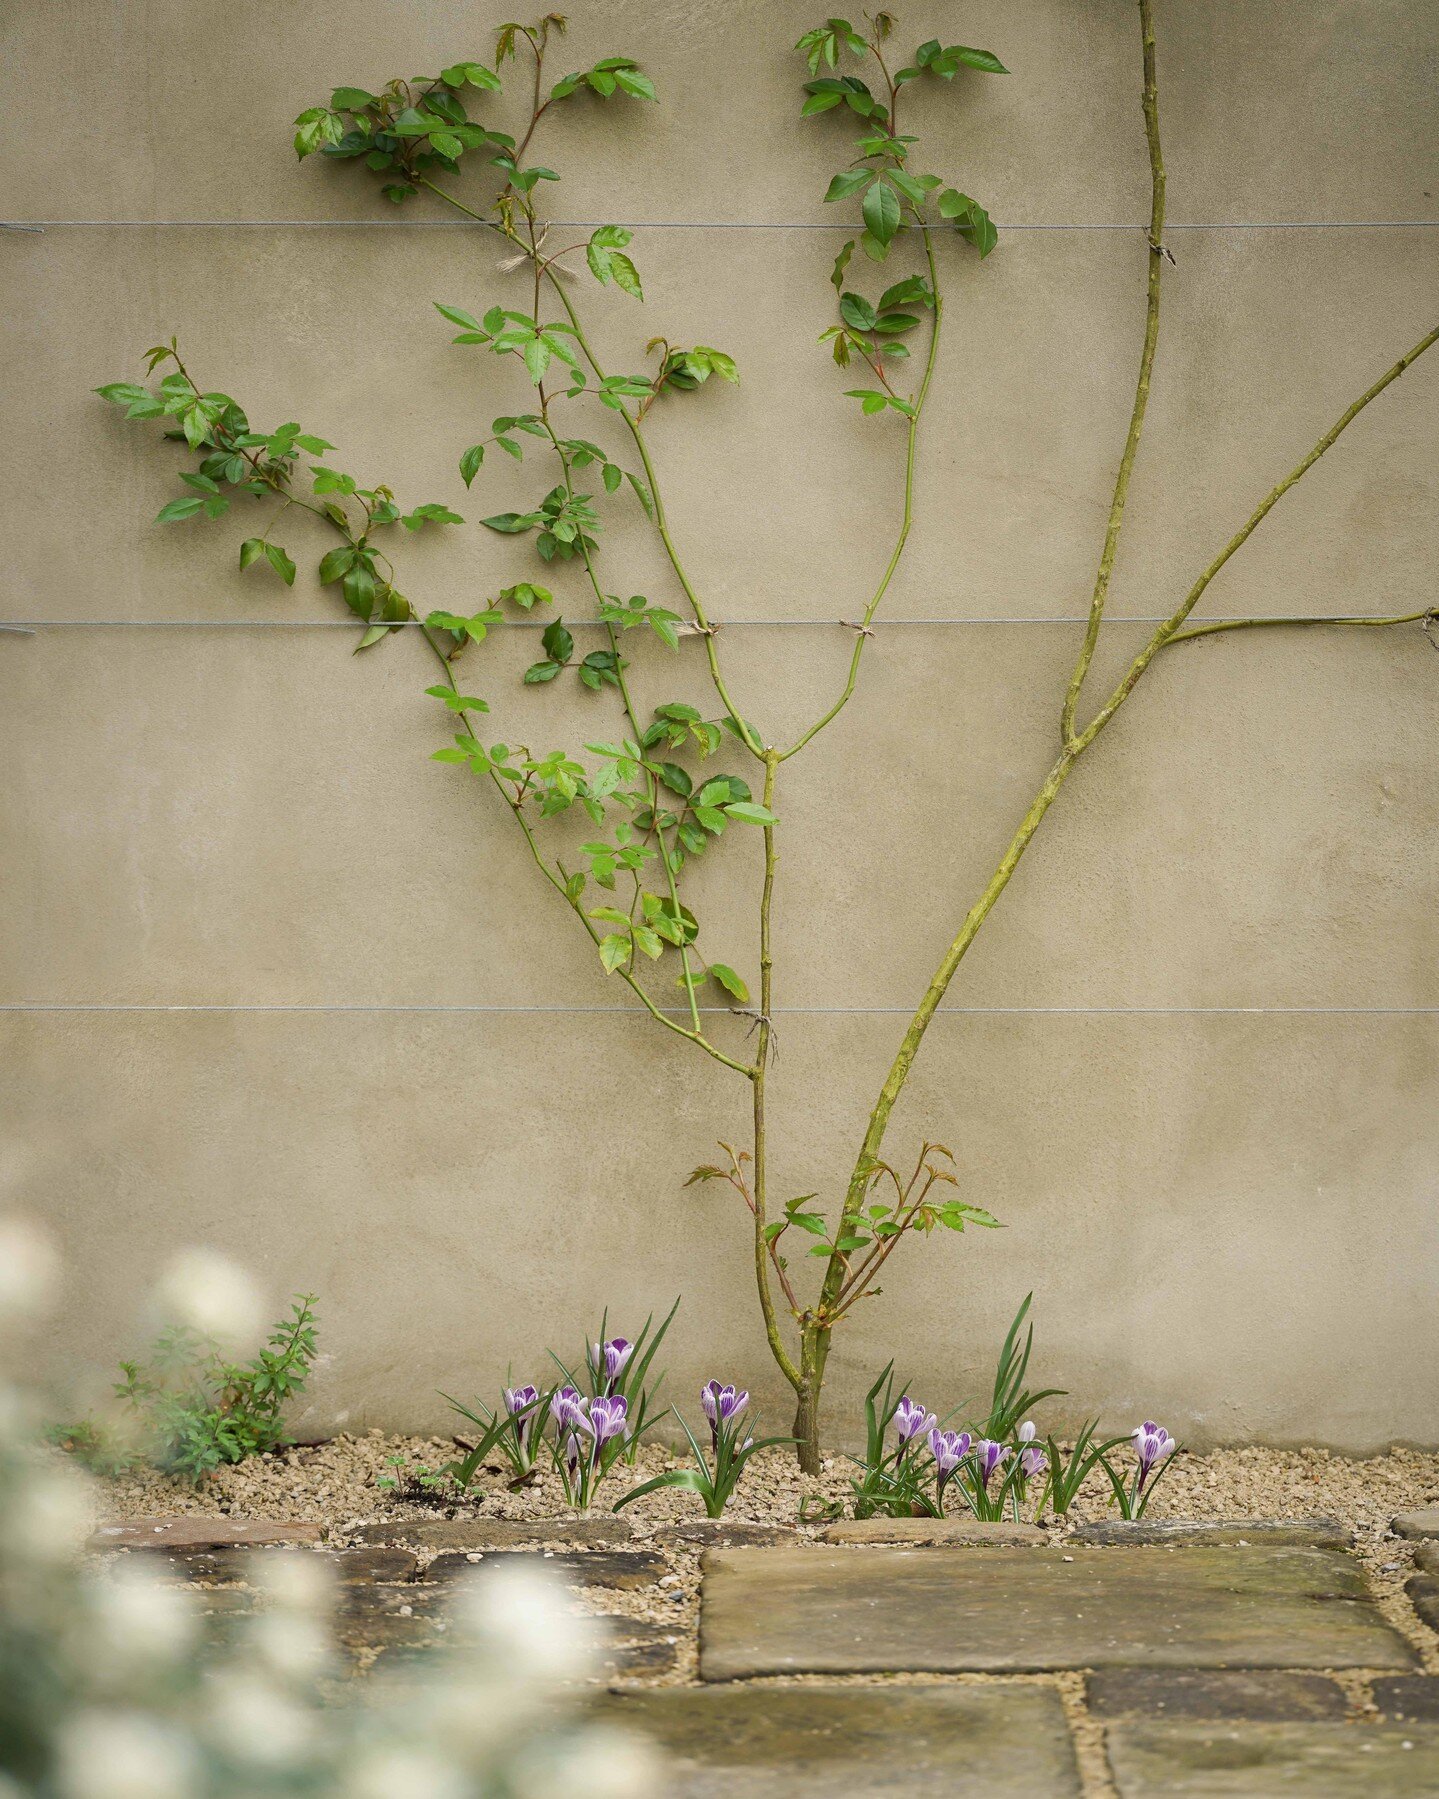 A quiet corner in one of our projects, showing graceful signs of Spring. 
Subtle details &amp; careful considerations make all the difference. 

#springgarden #gardendesign #farlamandchandler #gardensofinstagram #designstudio #landscapedetails